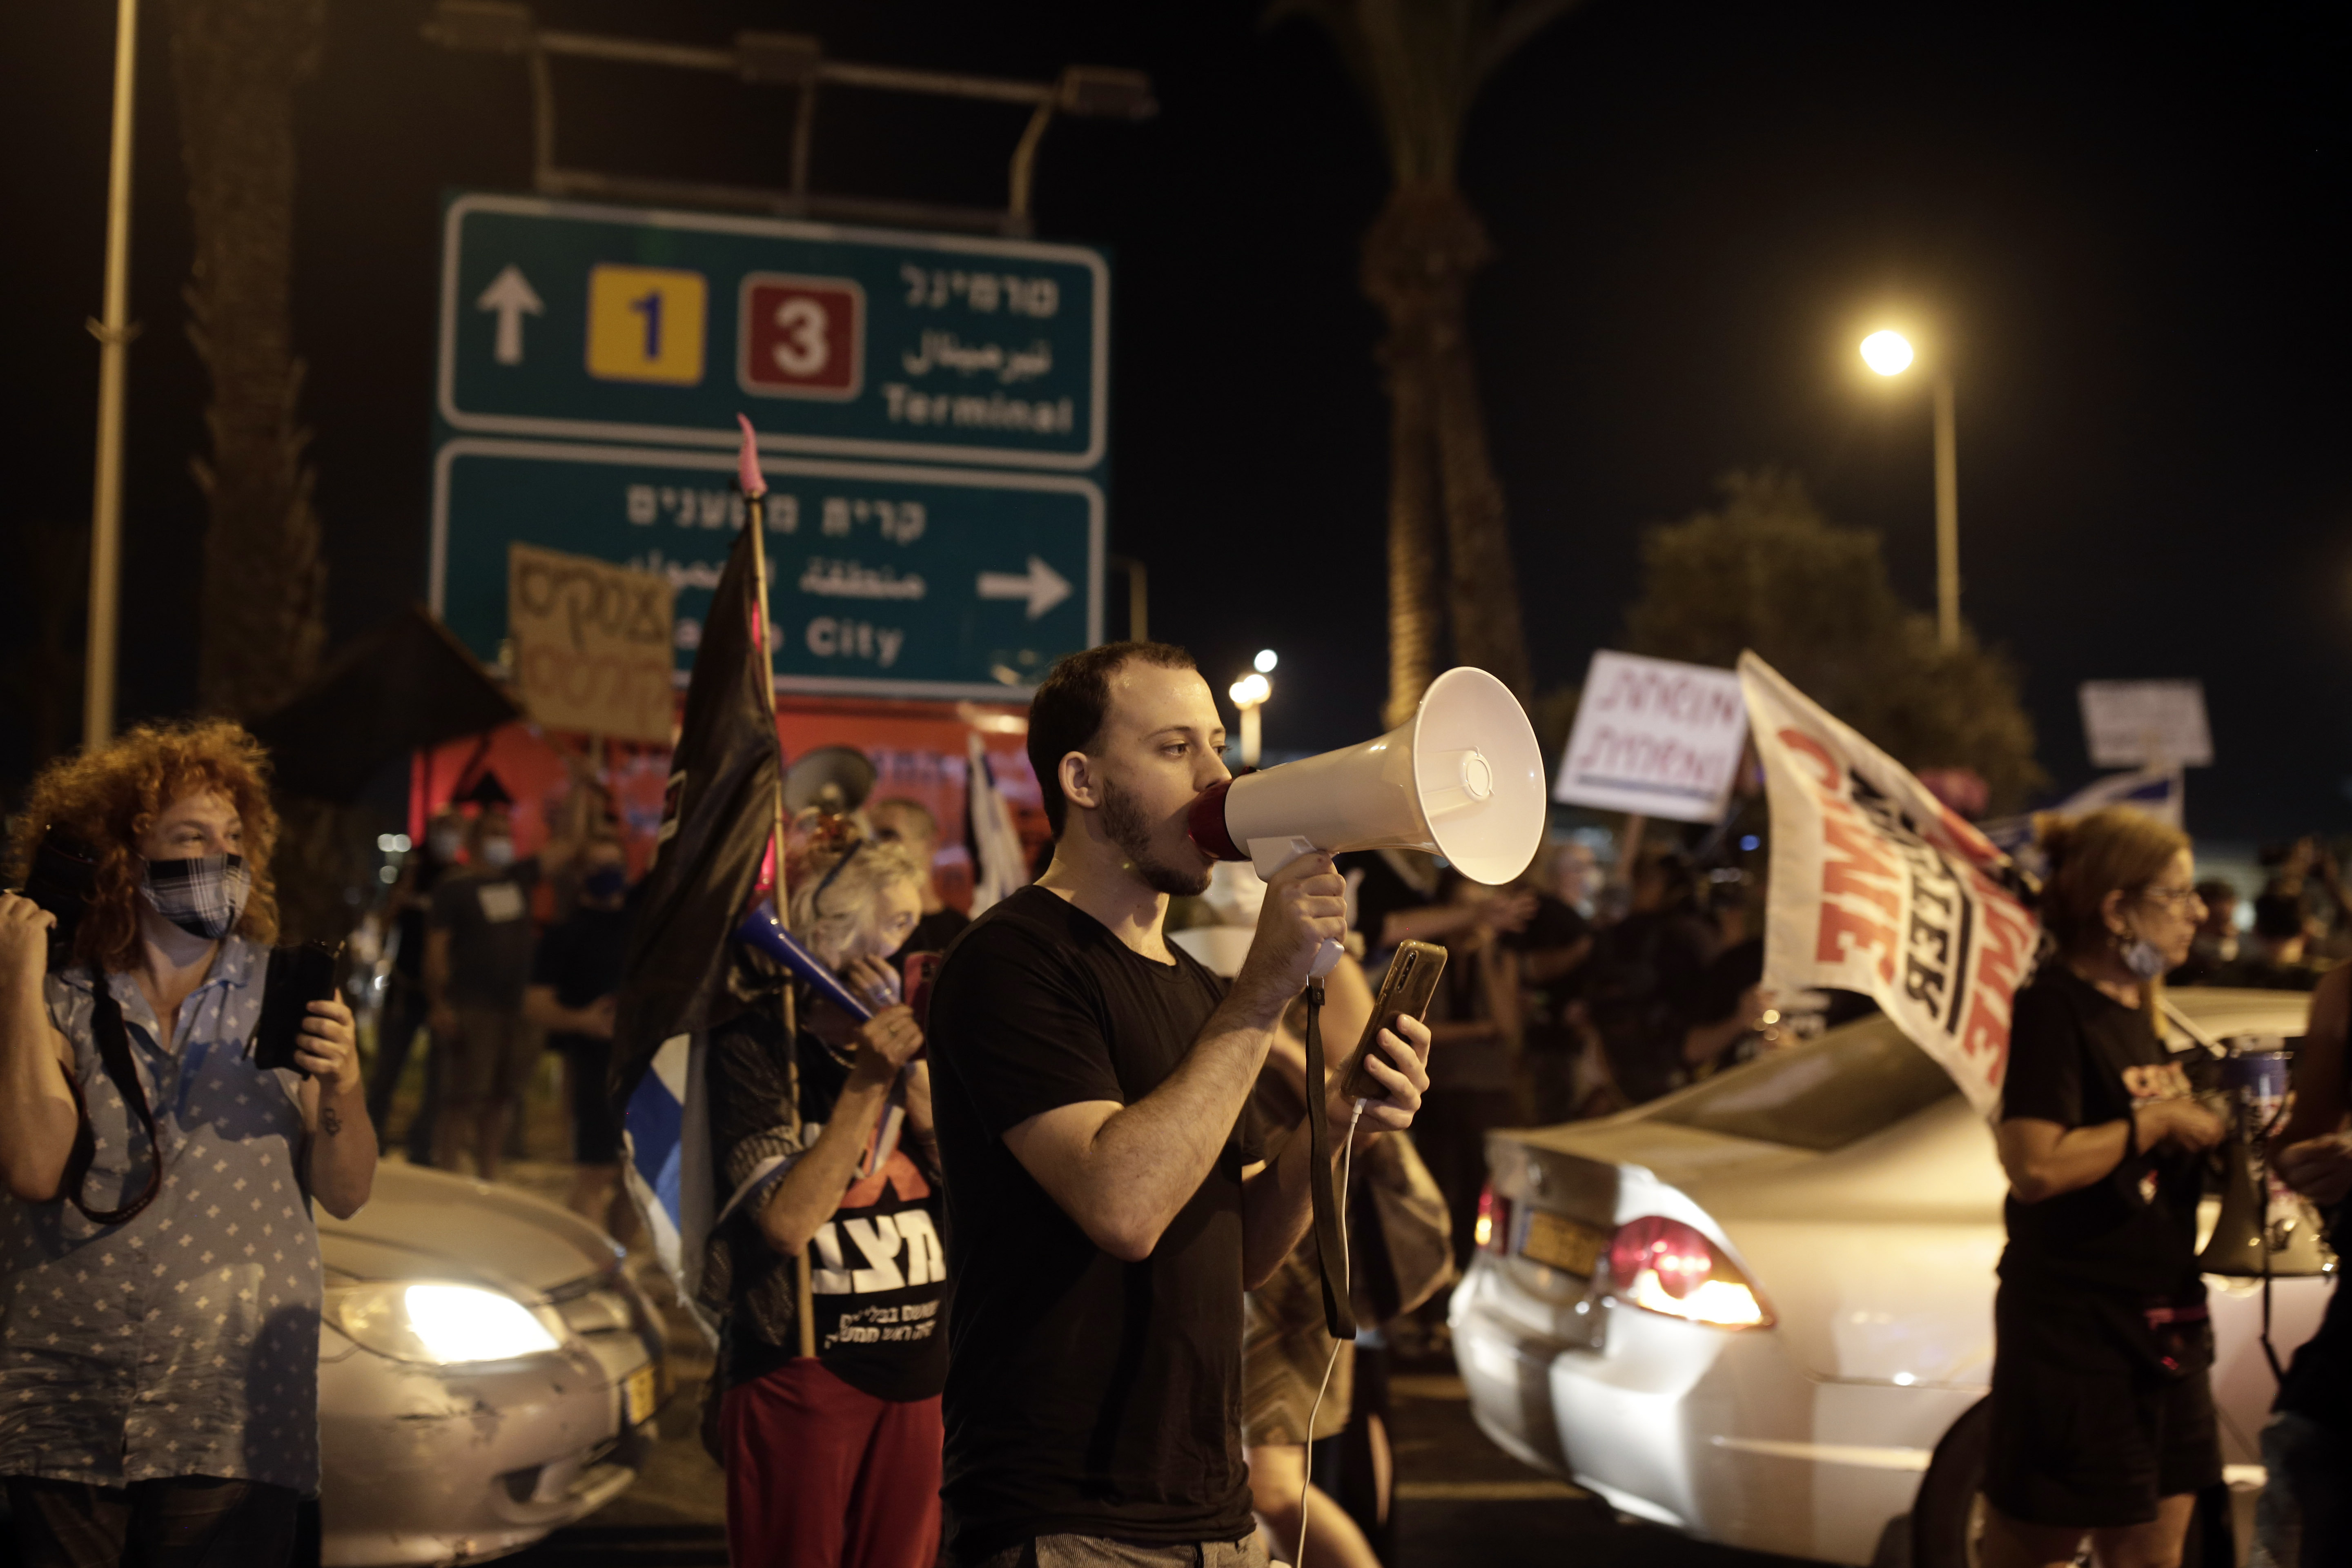 Protesters block an entrance to Ben Gurion Airport, where Israeli Prime Minister Benjamin Netanyahu and his family were expected to fly with an Israeli delegation to the U.S. for a ceremony with the United Arab Emirates, in Tel Aviv, Sunday, Sept. 13, 2020. (AP Photo/Maya Alleruzzo)